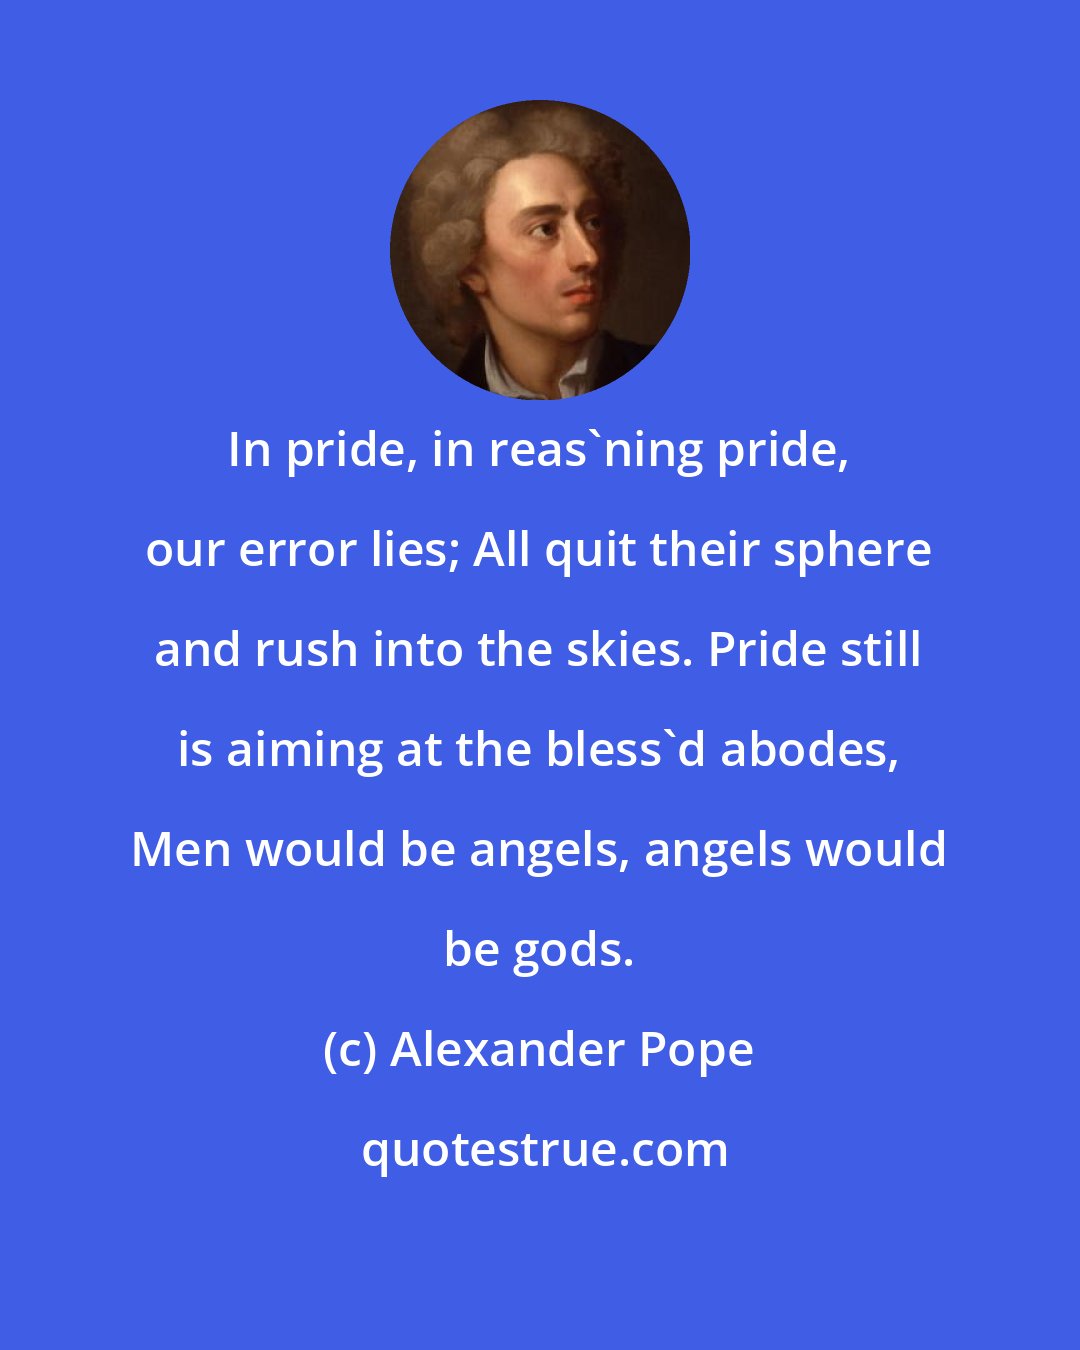 Alexander Pope: In pride, in reas'ning pride, our error lies; All quit their sphere and rush into the skies. Pride still is aiming at the bless'd abodes, Men would be angels, angels would be gods.